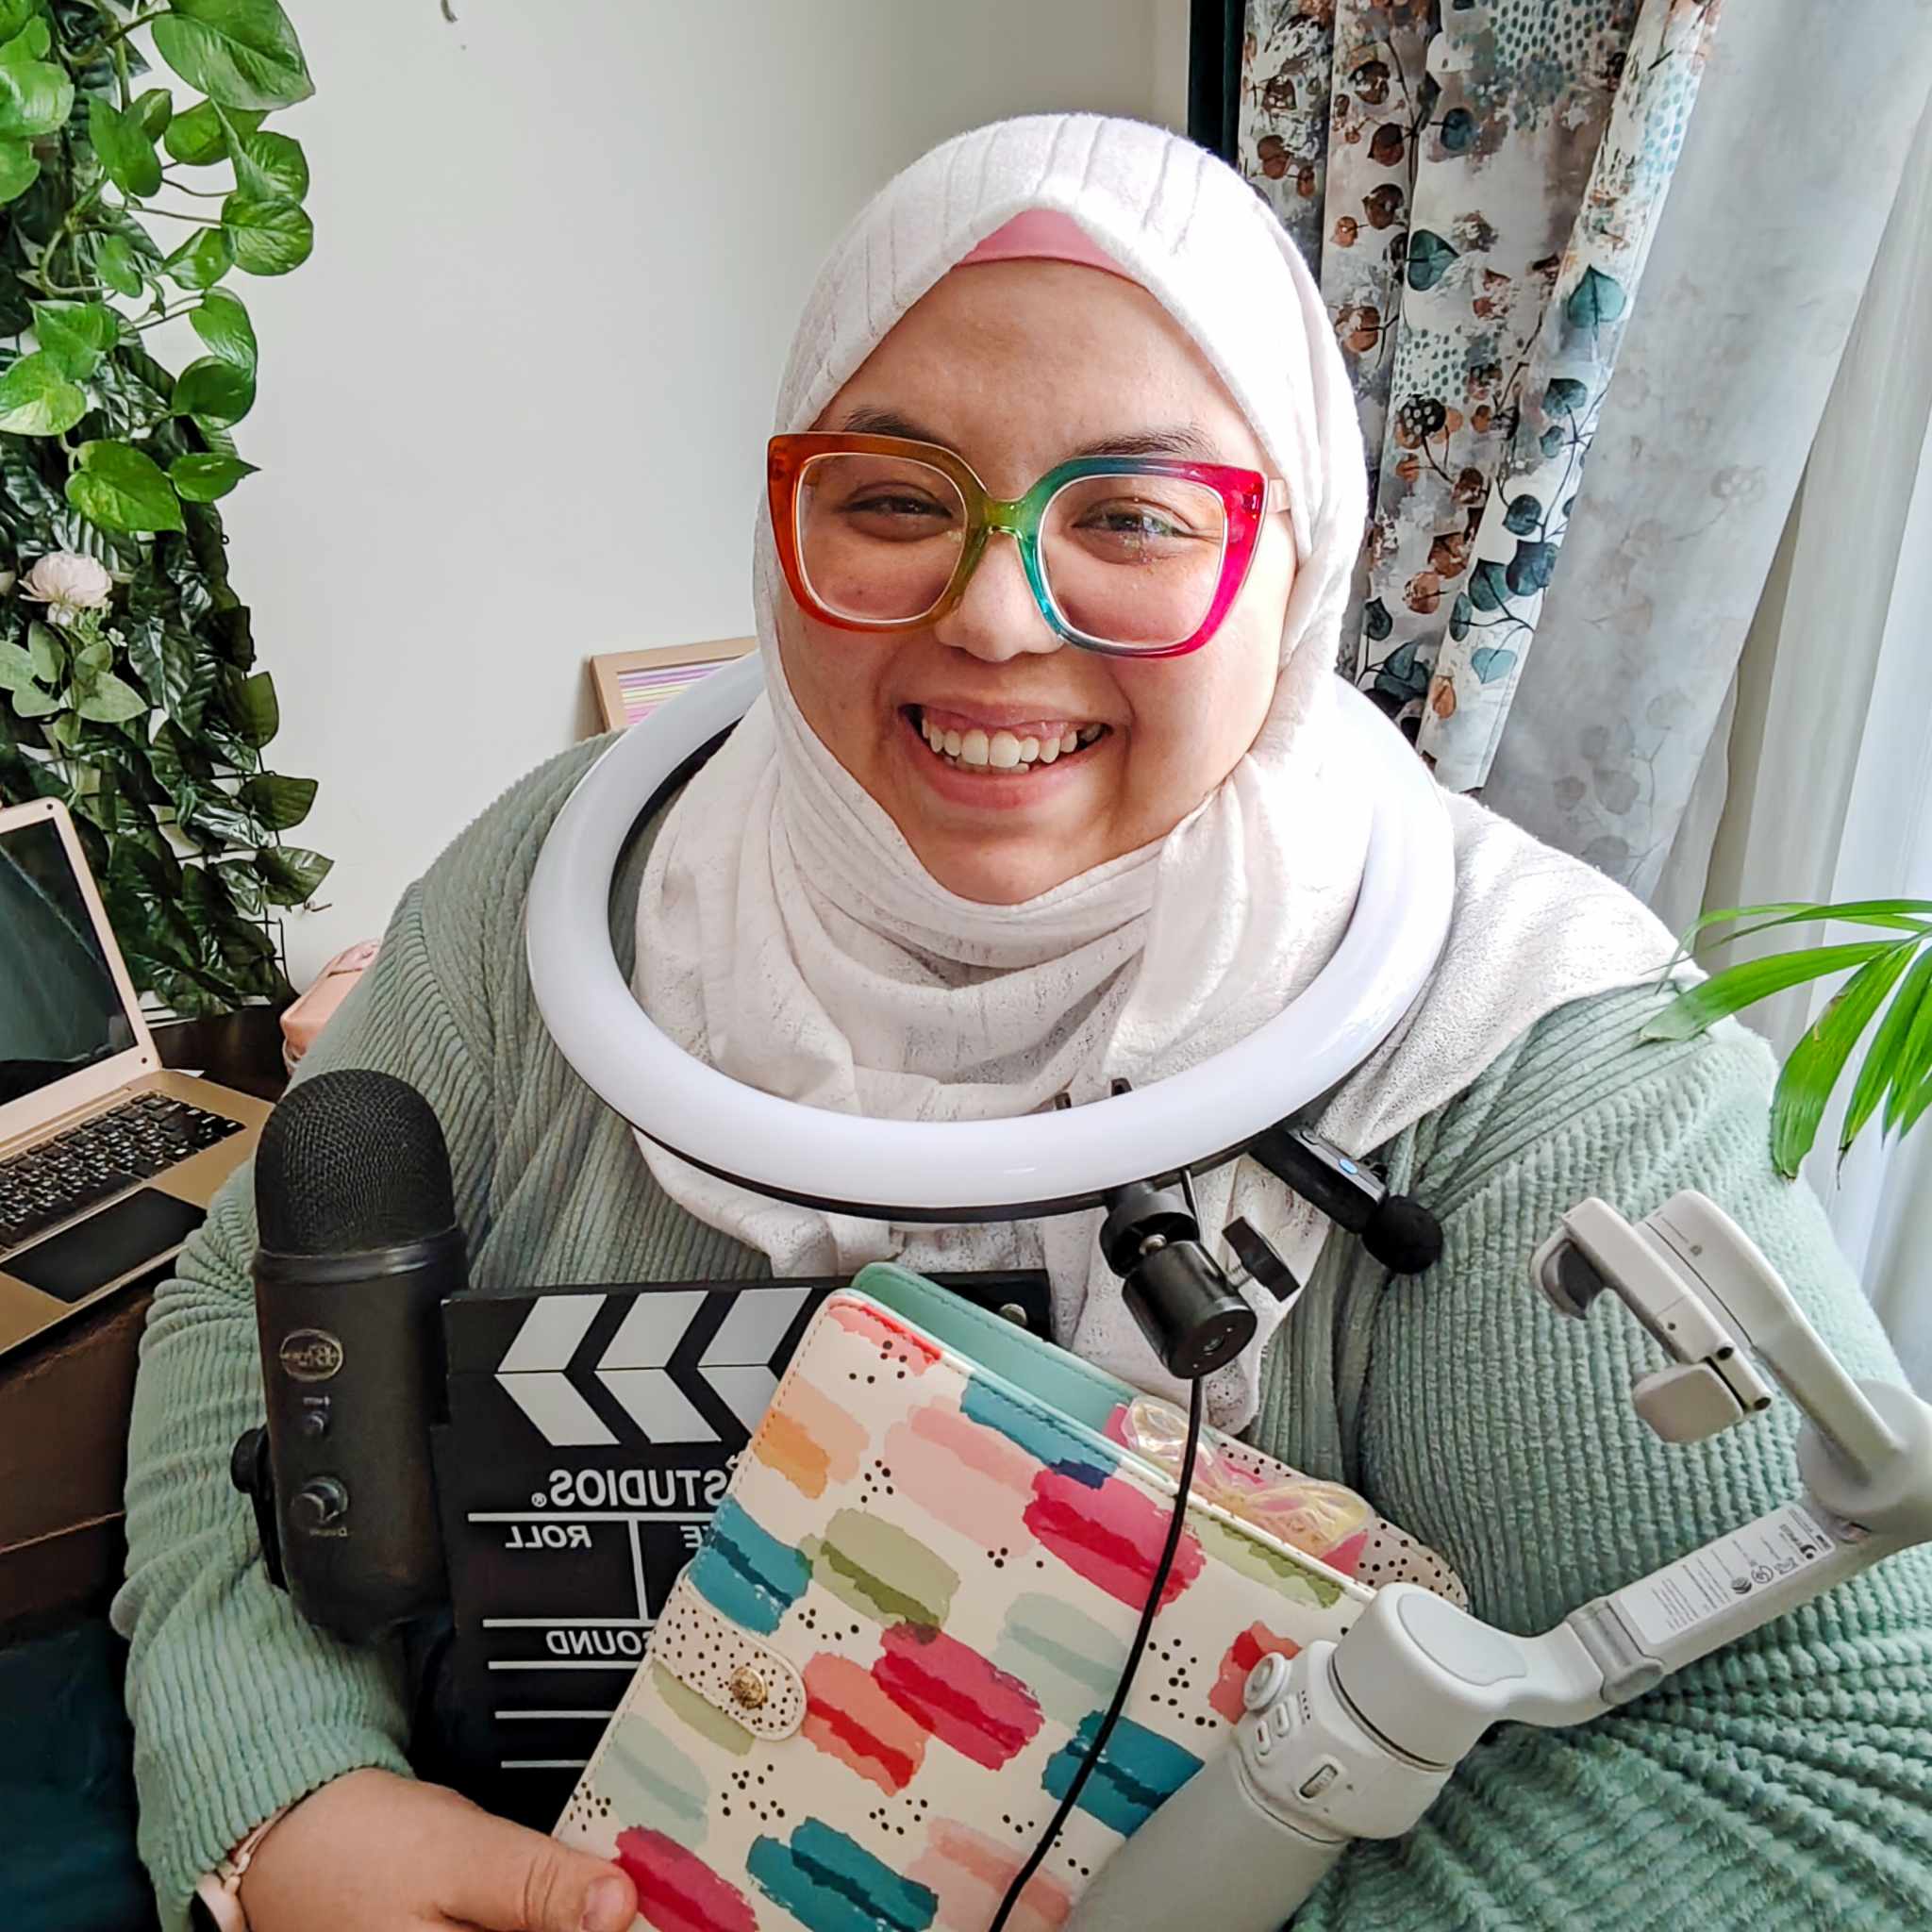 Woman with headscarf smiling while holding a notebook and podcasting equipment.